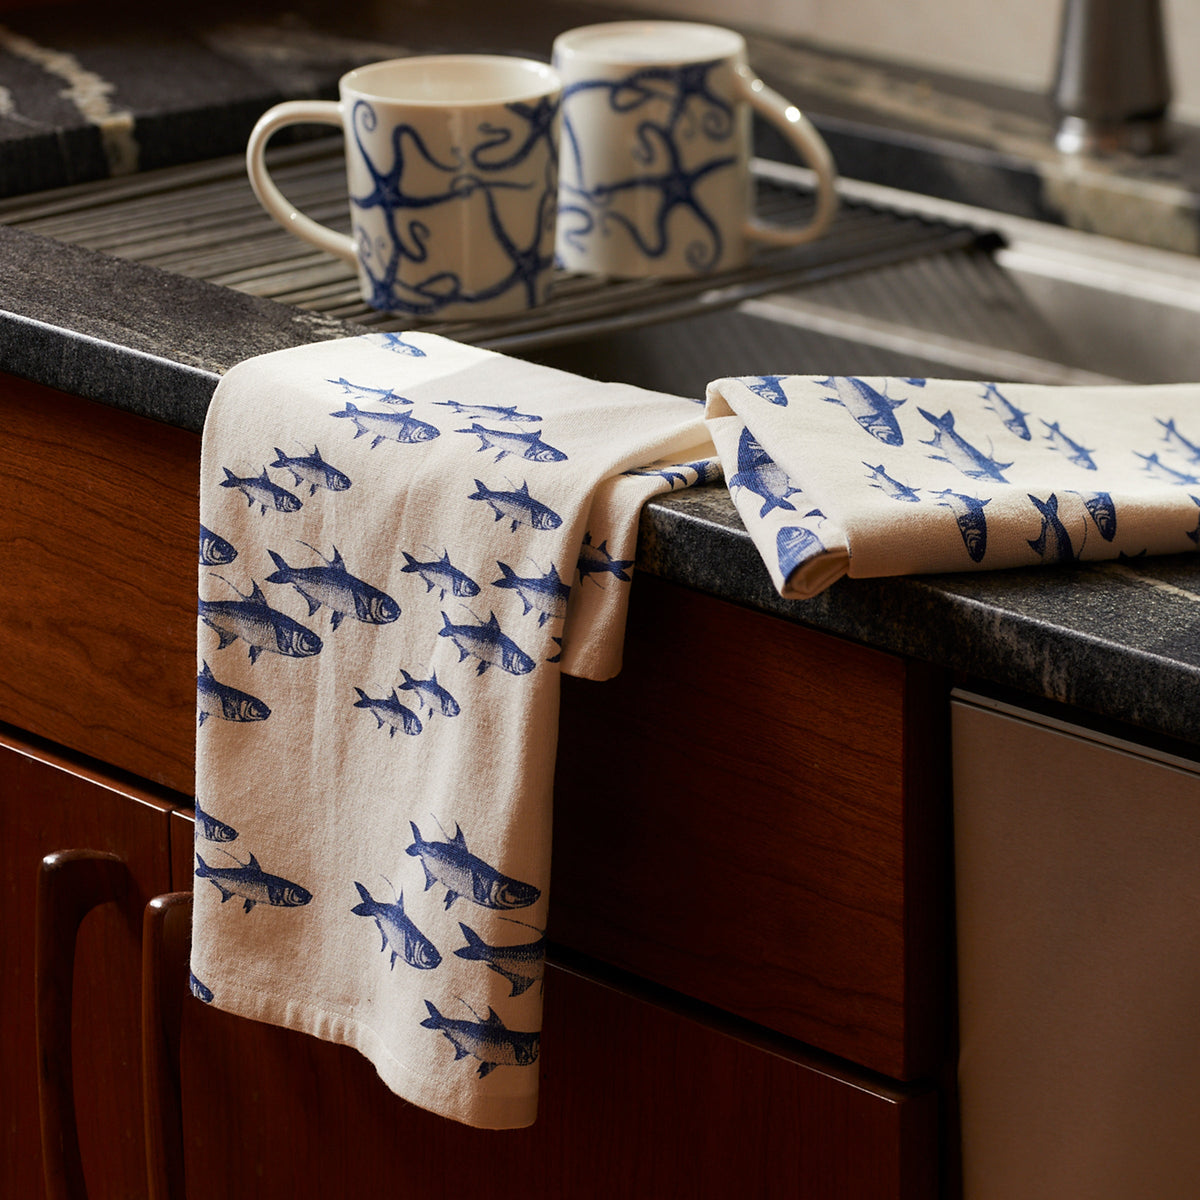 A Caskata School of Fish Kitchen Towel, Set of 2 with blue fish patterns hanging on the edge of a dark countertop, with two matching mugs from a dinnerware collection in the background.